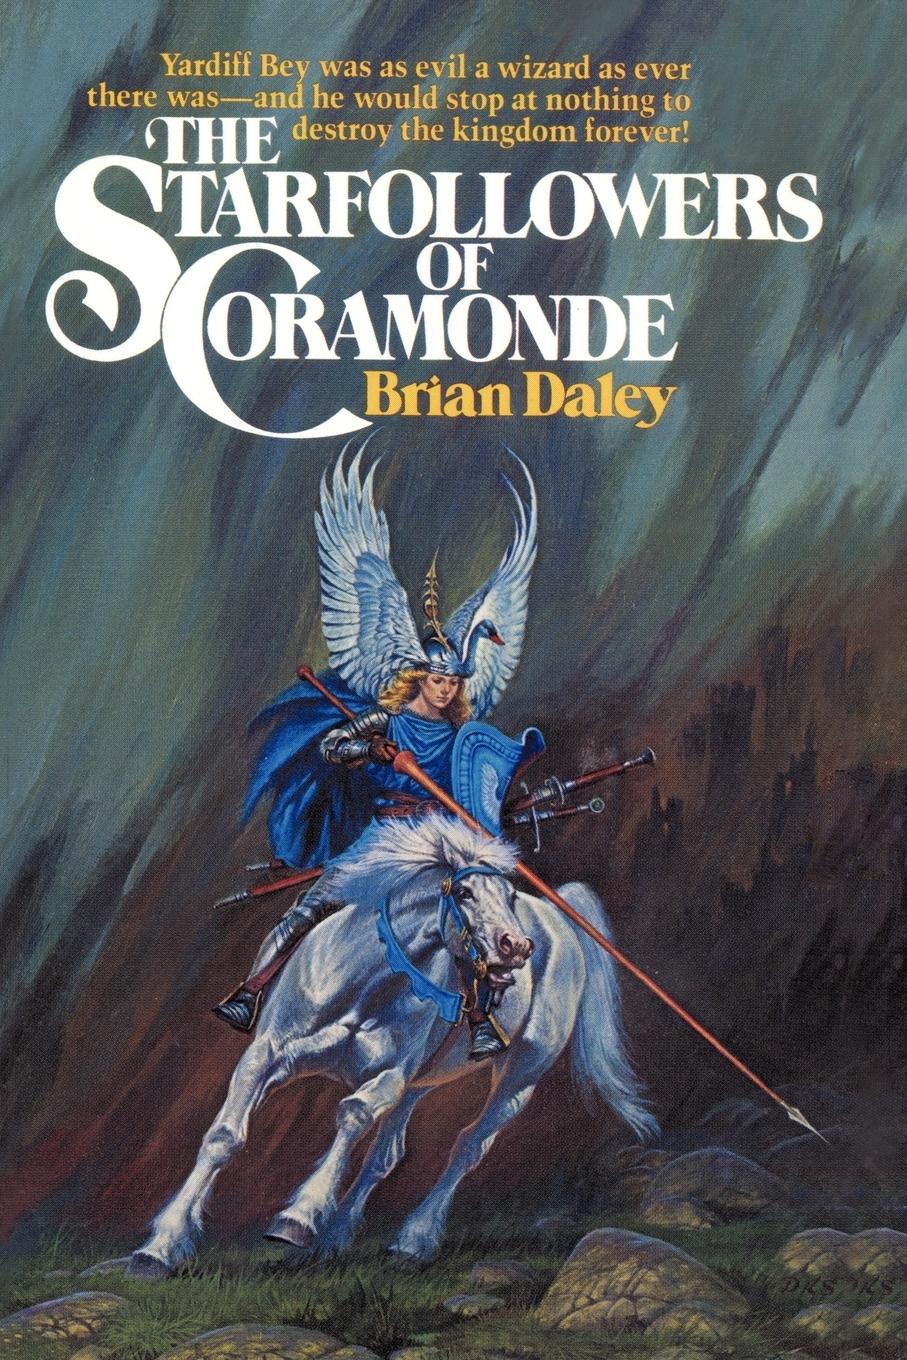 The Starfollowers of Coramonde - Brian Daley, Daley